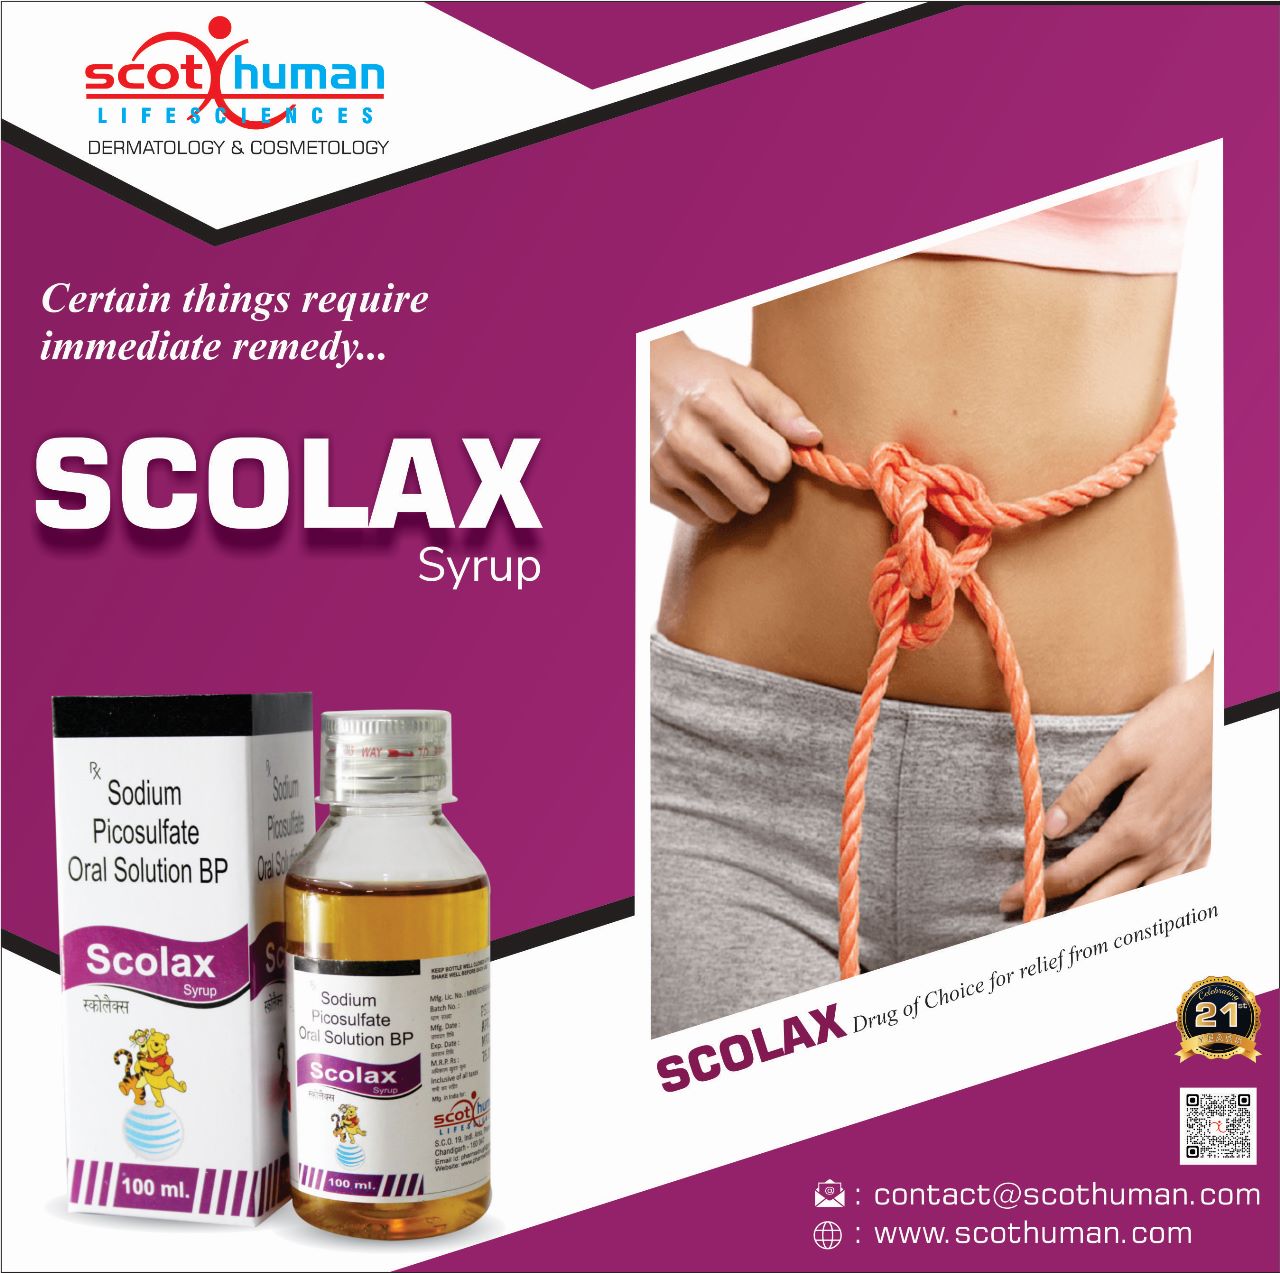 Product Name: Scolax, Compositions of Scolax are Sodium Picosulphate Oral Solution BP - Pharma Drugs and Chemicals